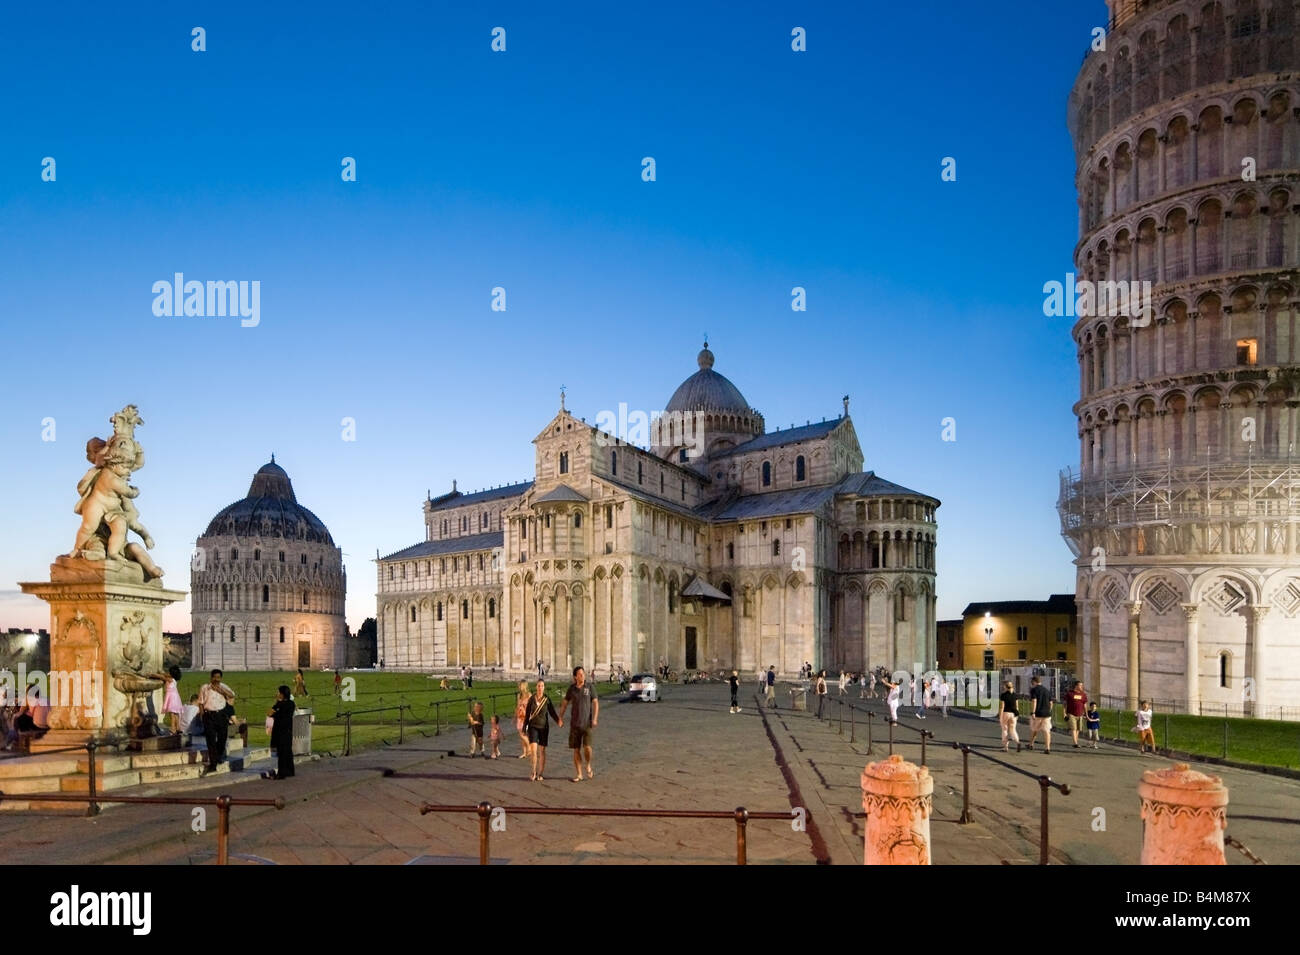 The Duomo, Baptistry and Leaning Tower at dusk, Piazza dei Miracoli, Pisa, Tuscany, Italy Stock Photo